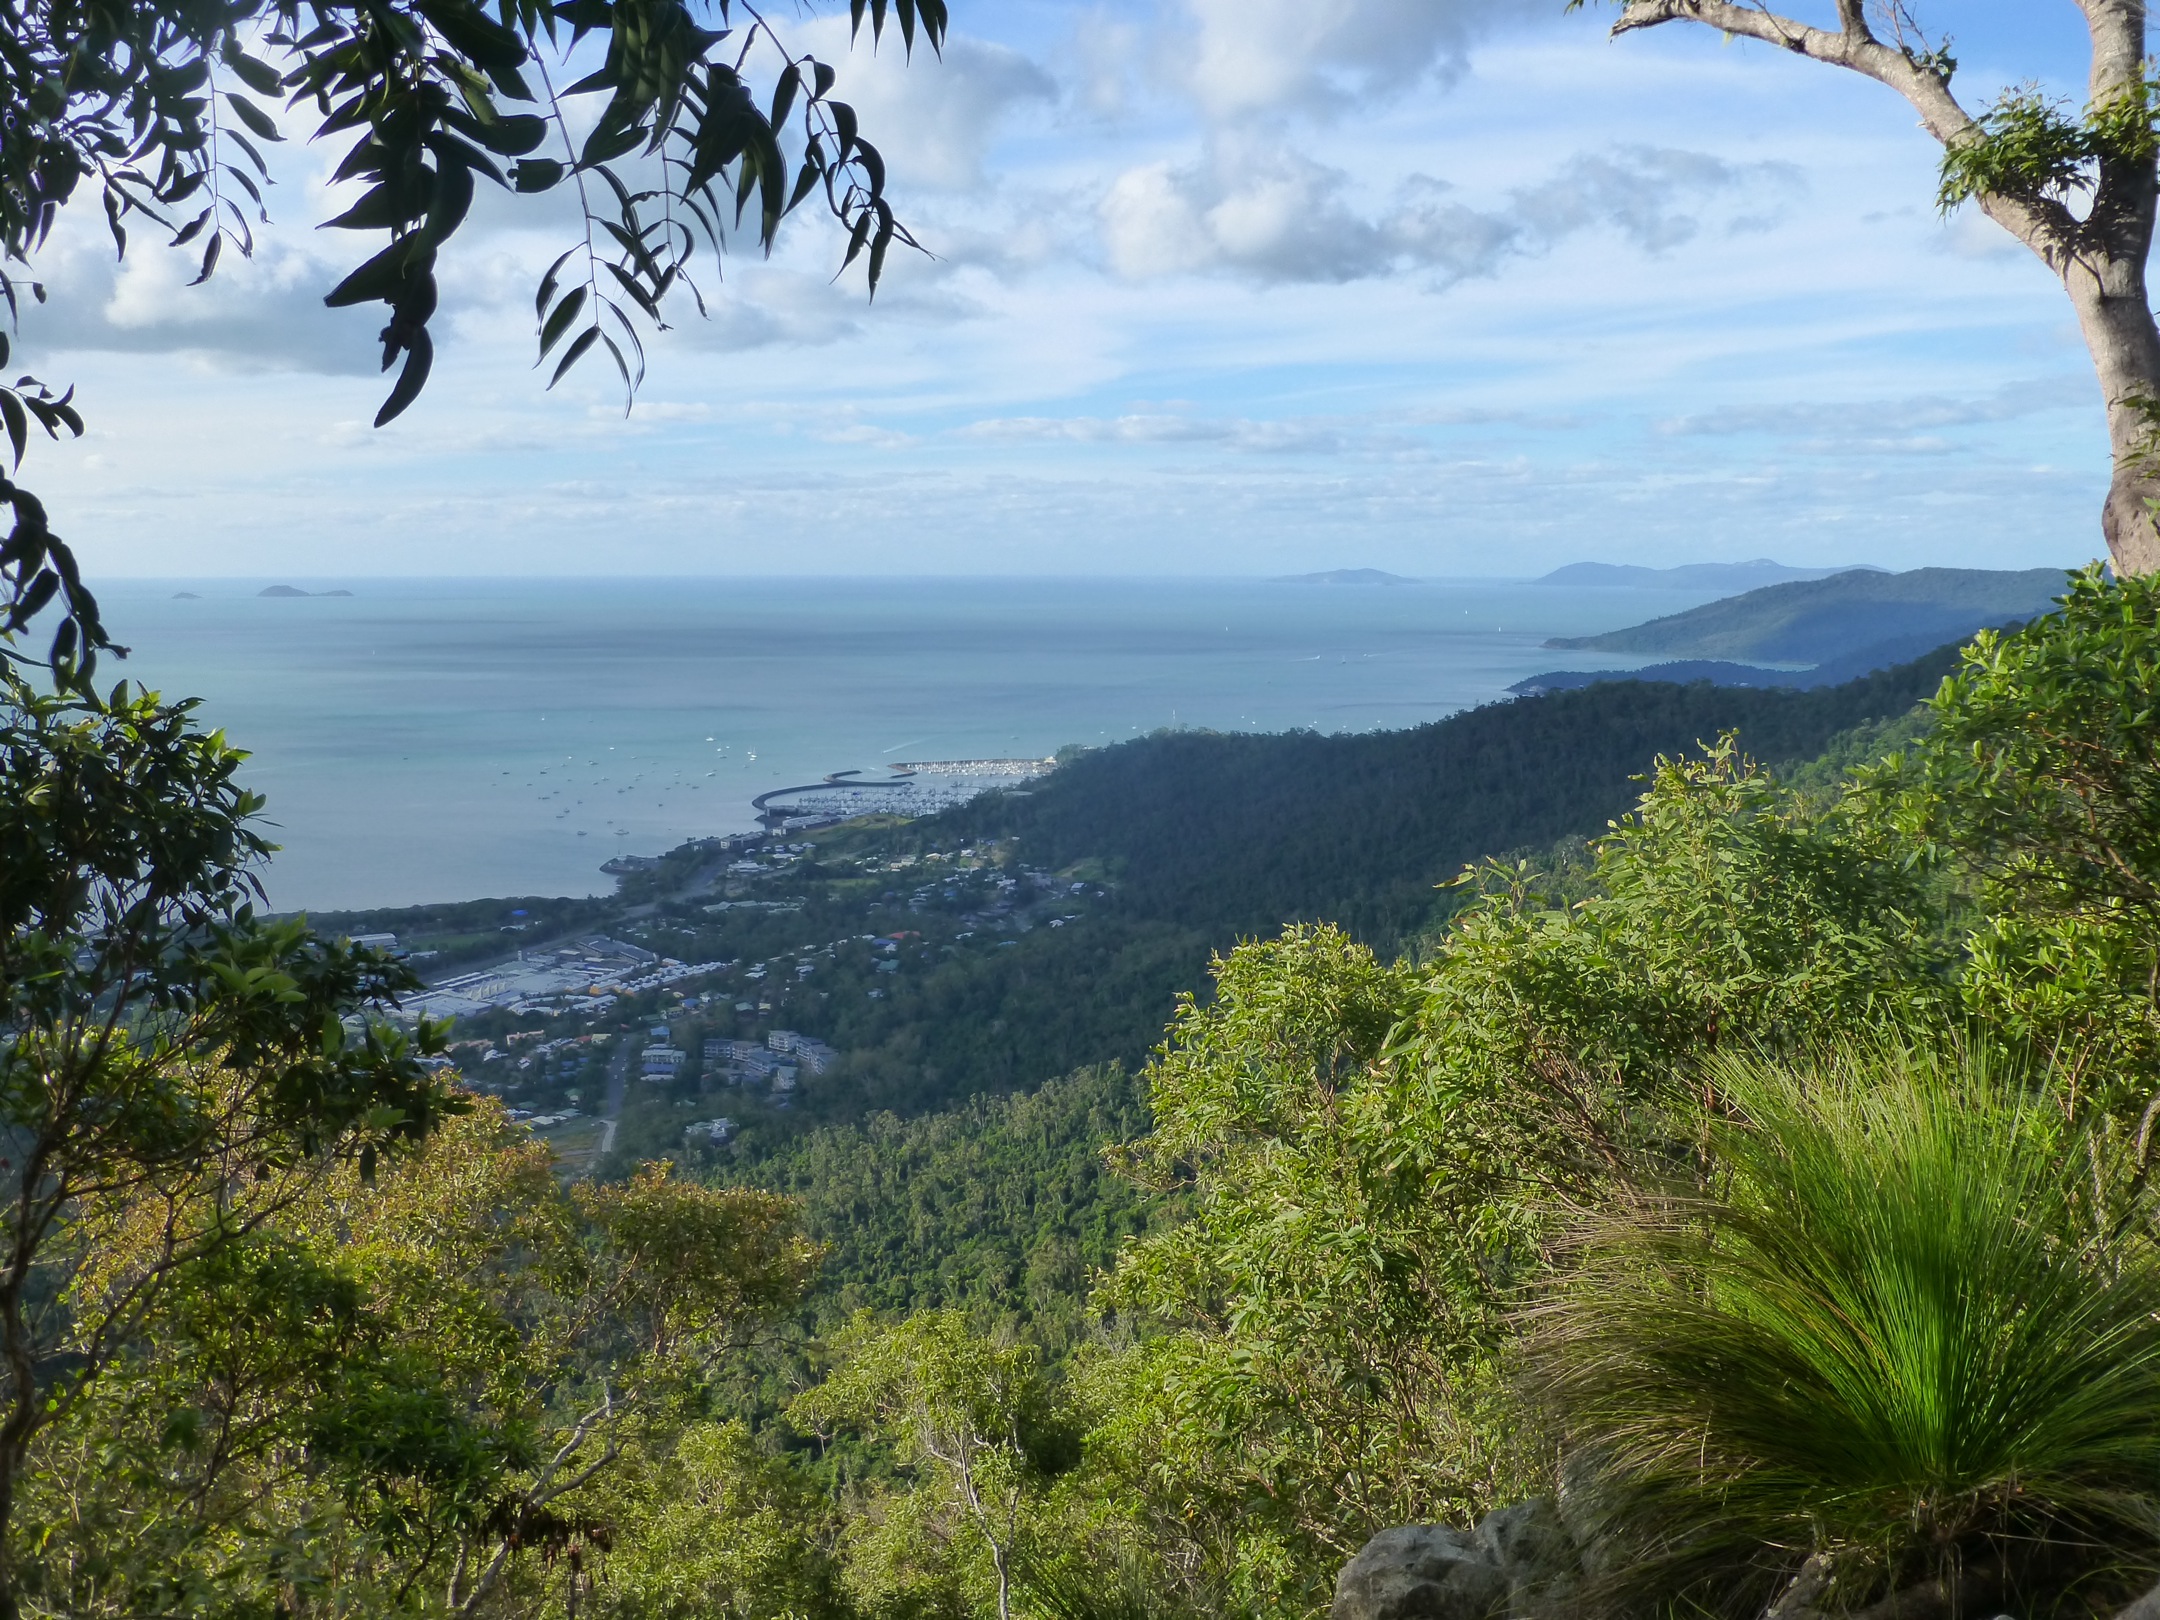 40km – Hiking near Airlie Beach (Conway National Park)